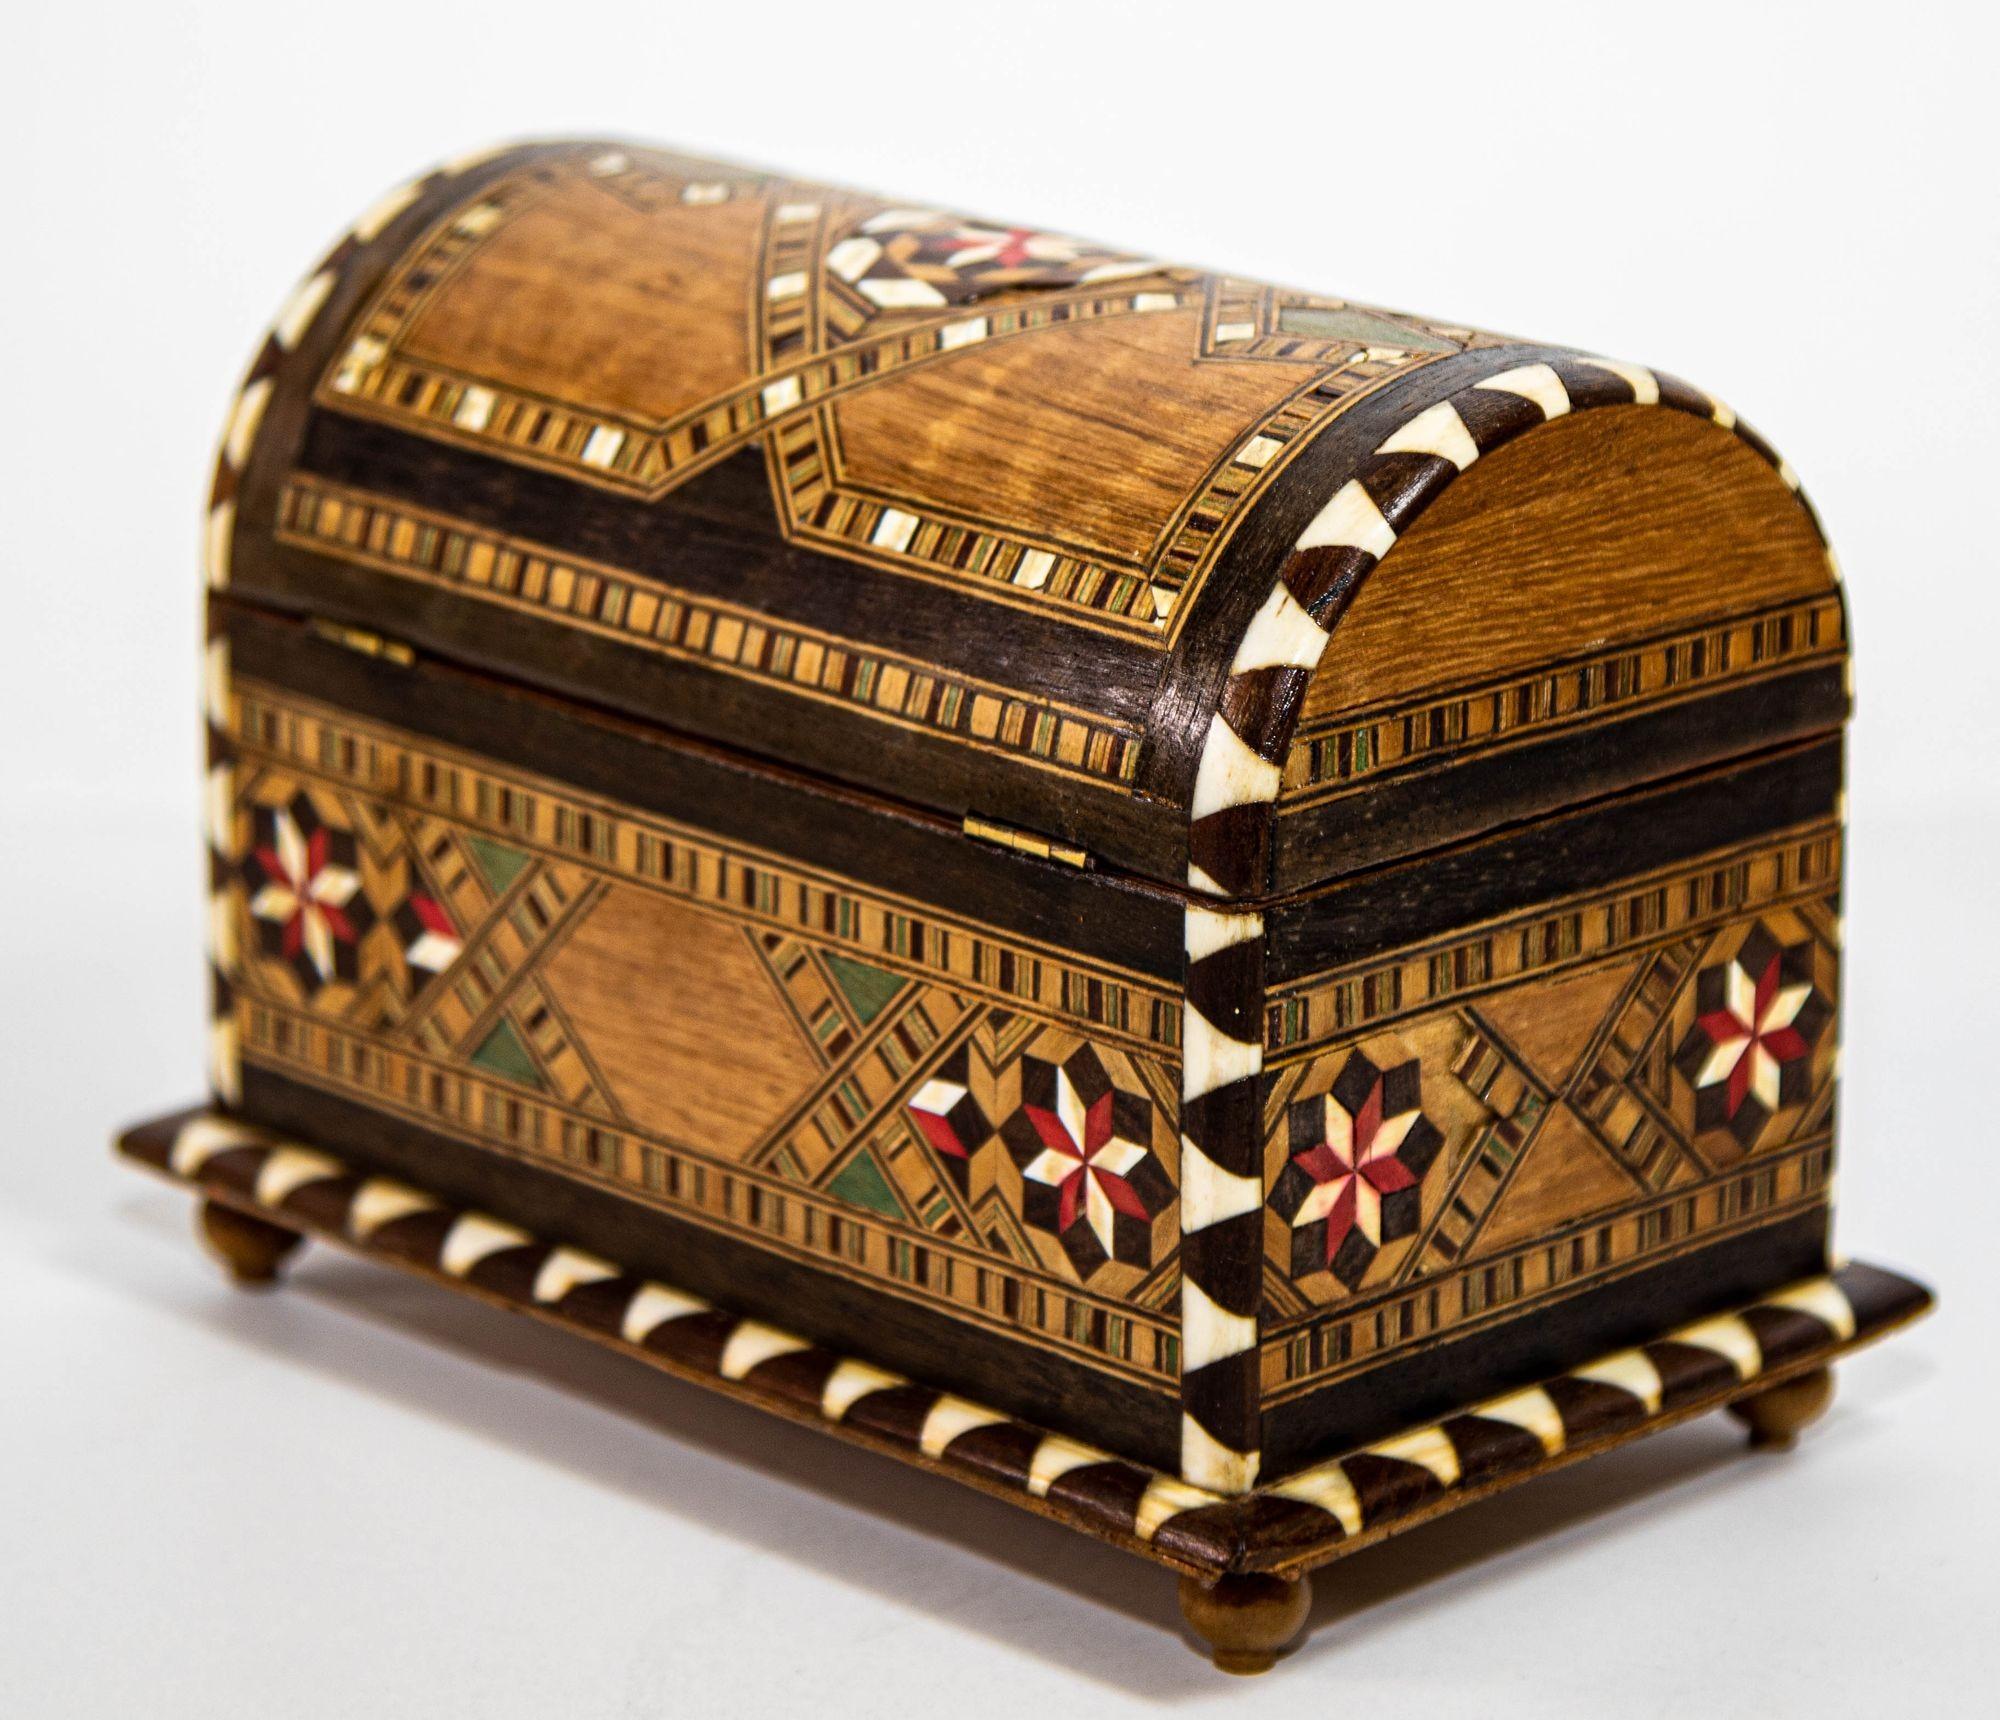 Moorish Spain Arch Top Intricate detailed wood inlaid Marquetry Jewelry box.
An Hispano Moresque Arch Top Wood Inlaid Marquetry Jewelry Box Casket.
Moorish style early to mid 20th century of typical shape, resting on four bulbous wooden feet, the